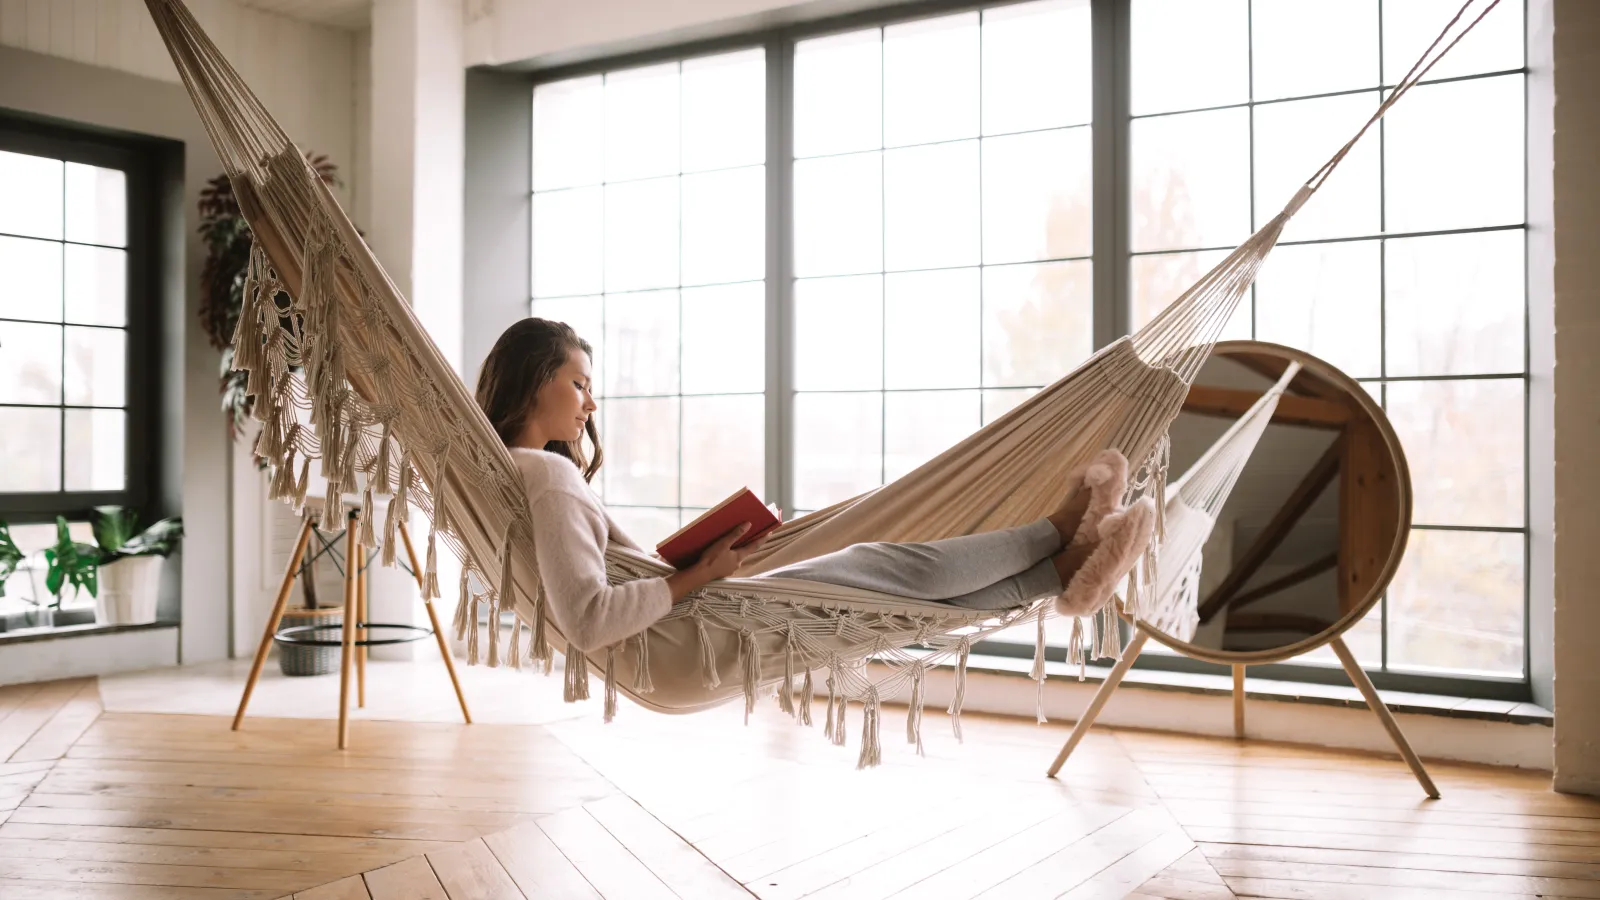 a person sitting in a hammock reading a book